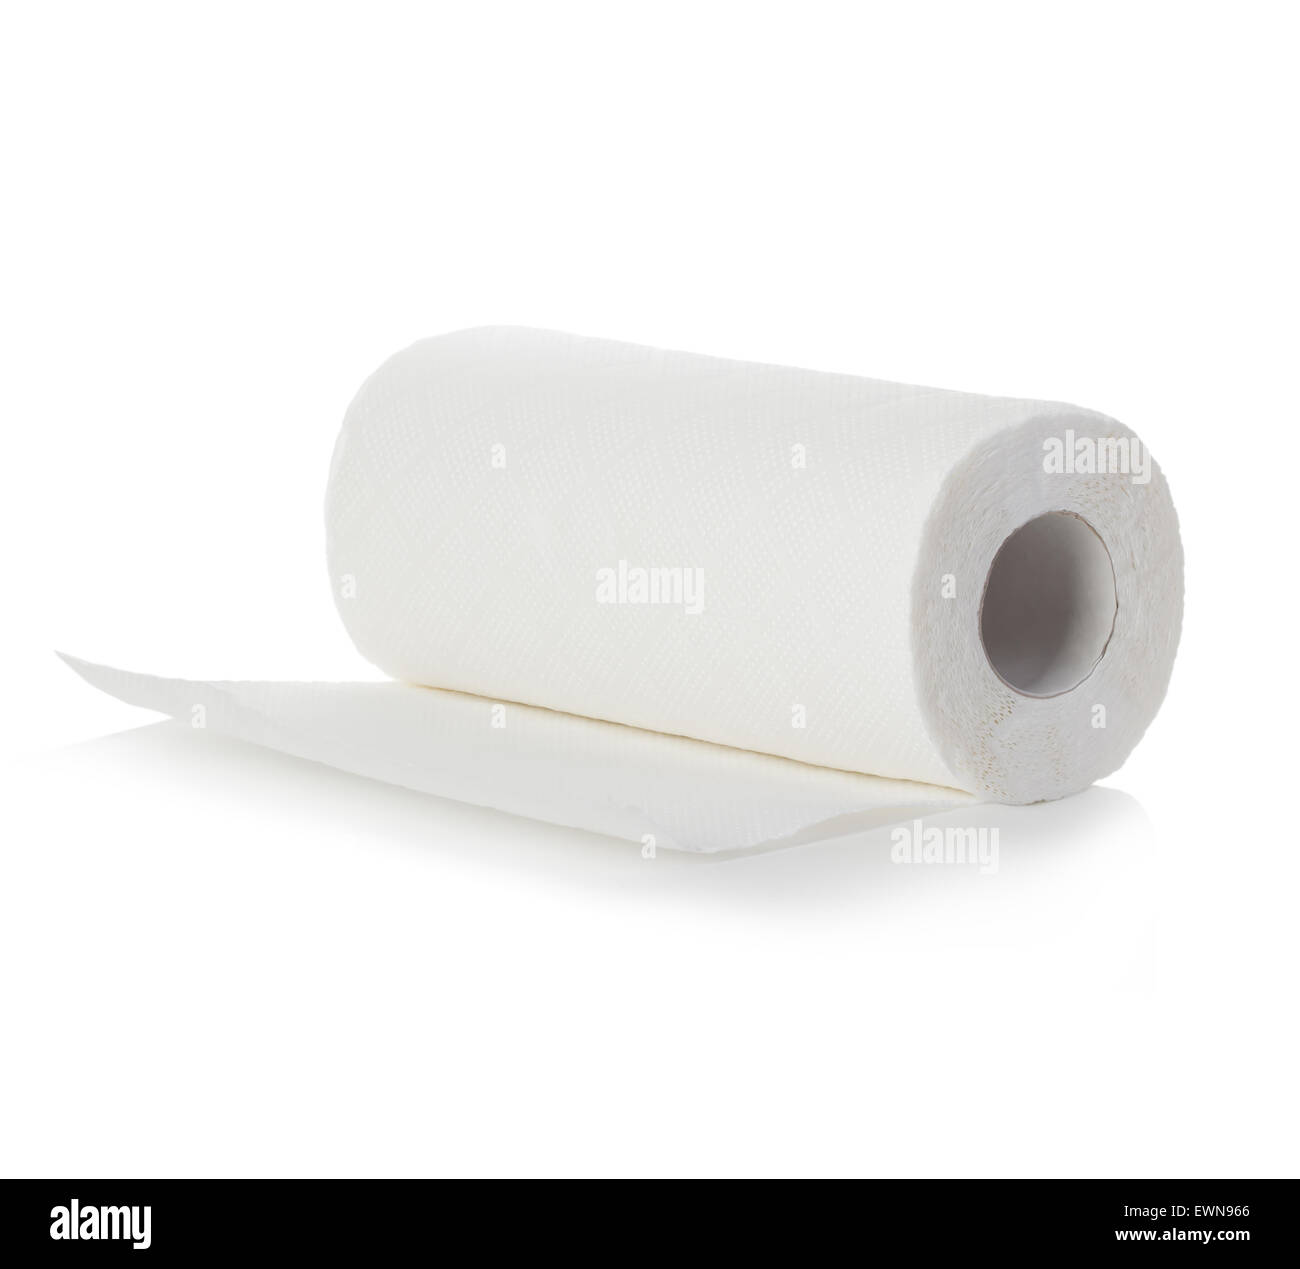 https://c8.alamy.com/comp/EWN966/roll-of-paper-towel-isolated-on-white-background-EWN966.jpg